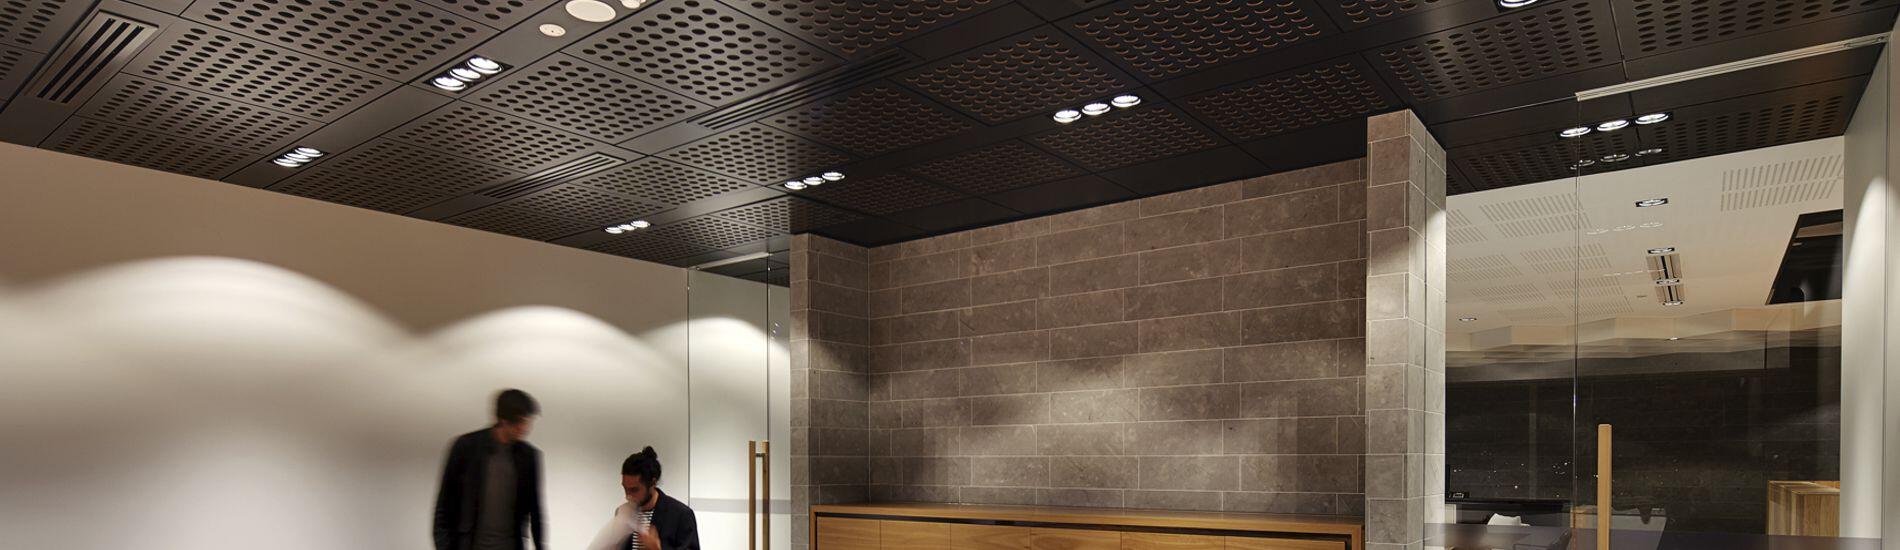 SUPATILE SLAT Ceiling Tiles and SUPACOUSTIC Panels Used To Address Acoustics Over Multiple Levels of Workplace Fitout